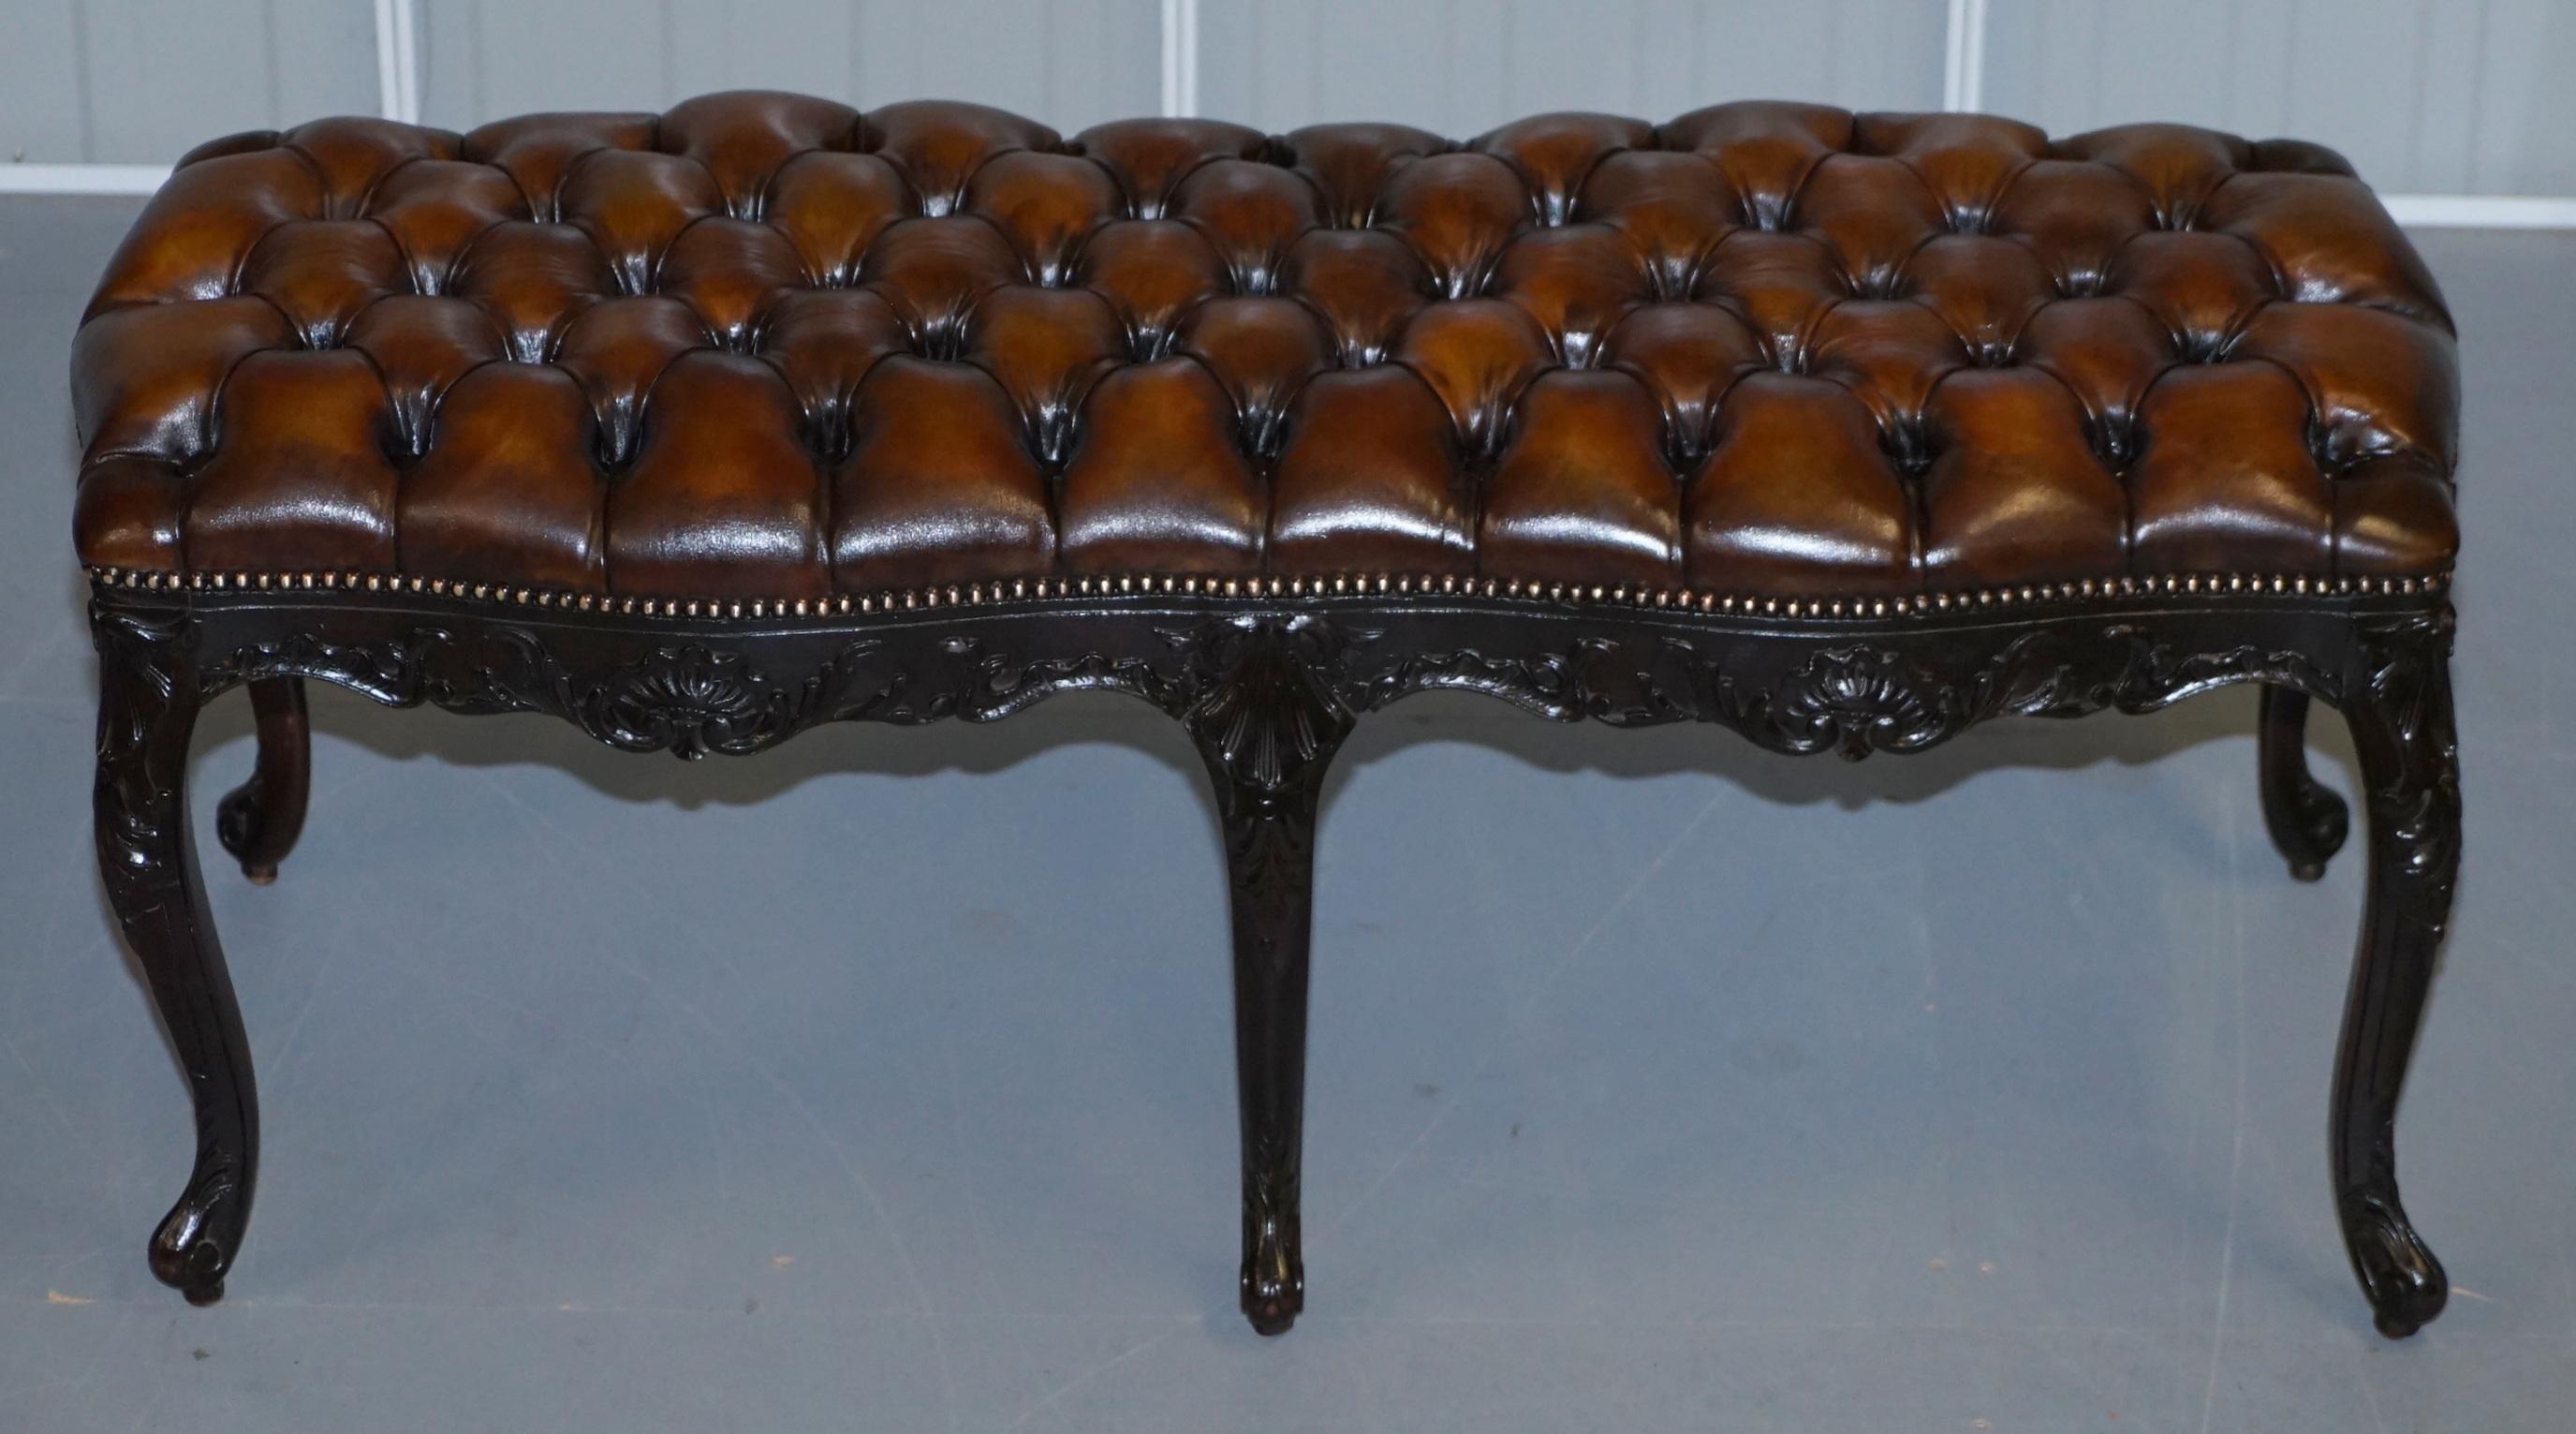 We are delighted to offer for sale this very rare original Victorian hand-sawn two person Piano stool bench, fully restored with Chesterfield cigar brown leather 

A very good looking collectable and rare bench. As you can see by the pictures of